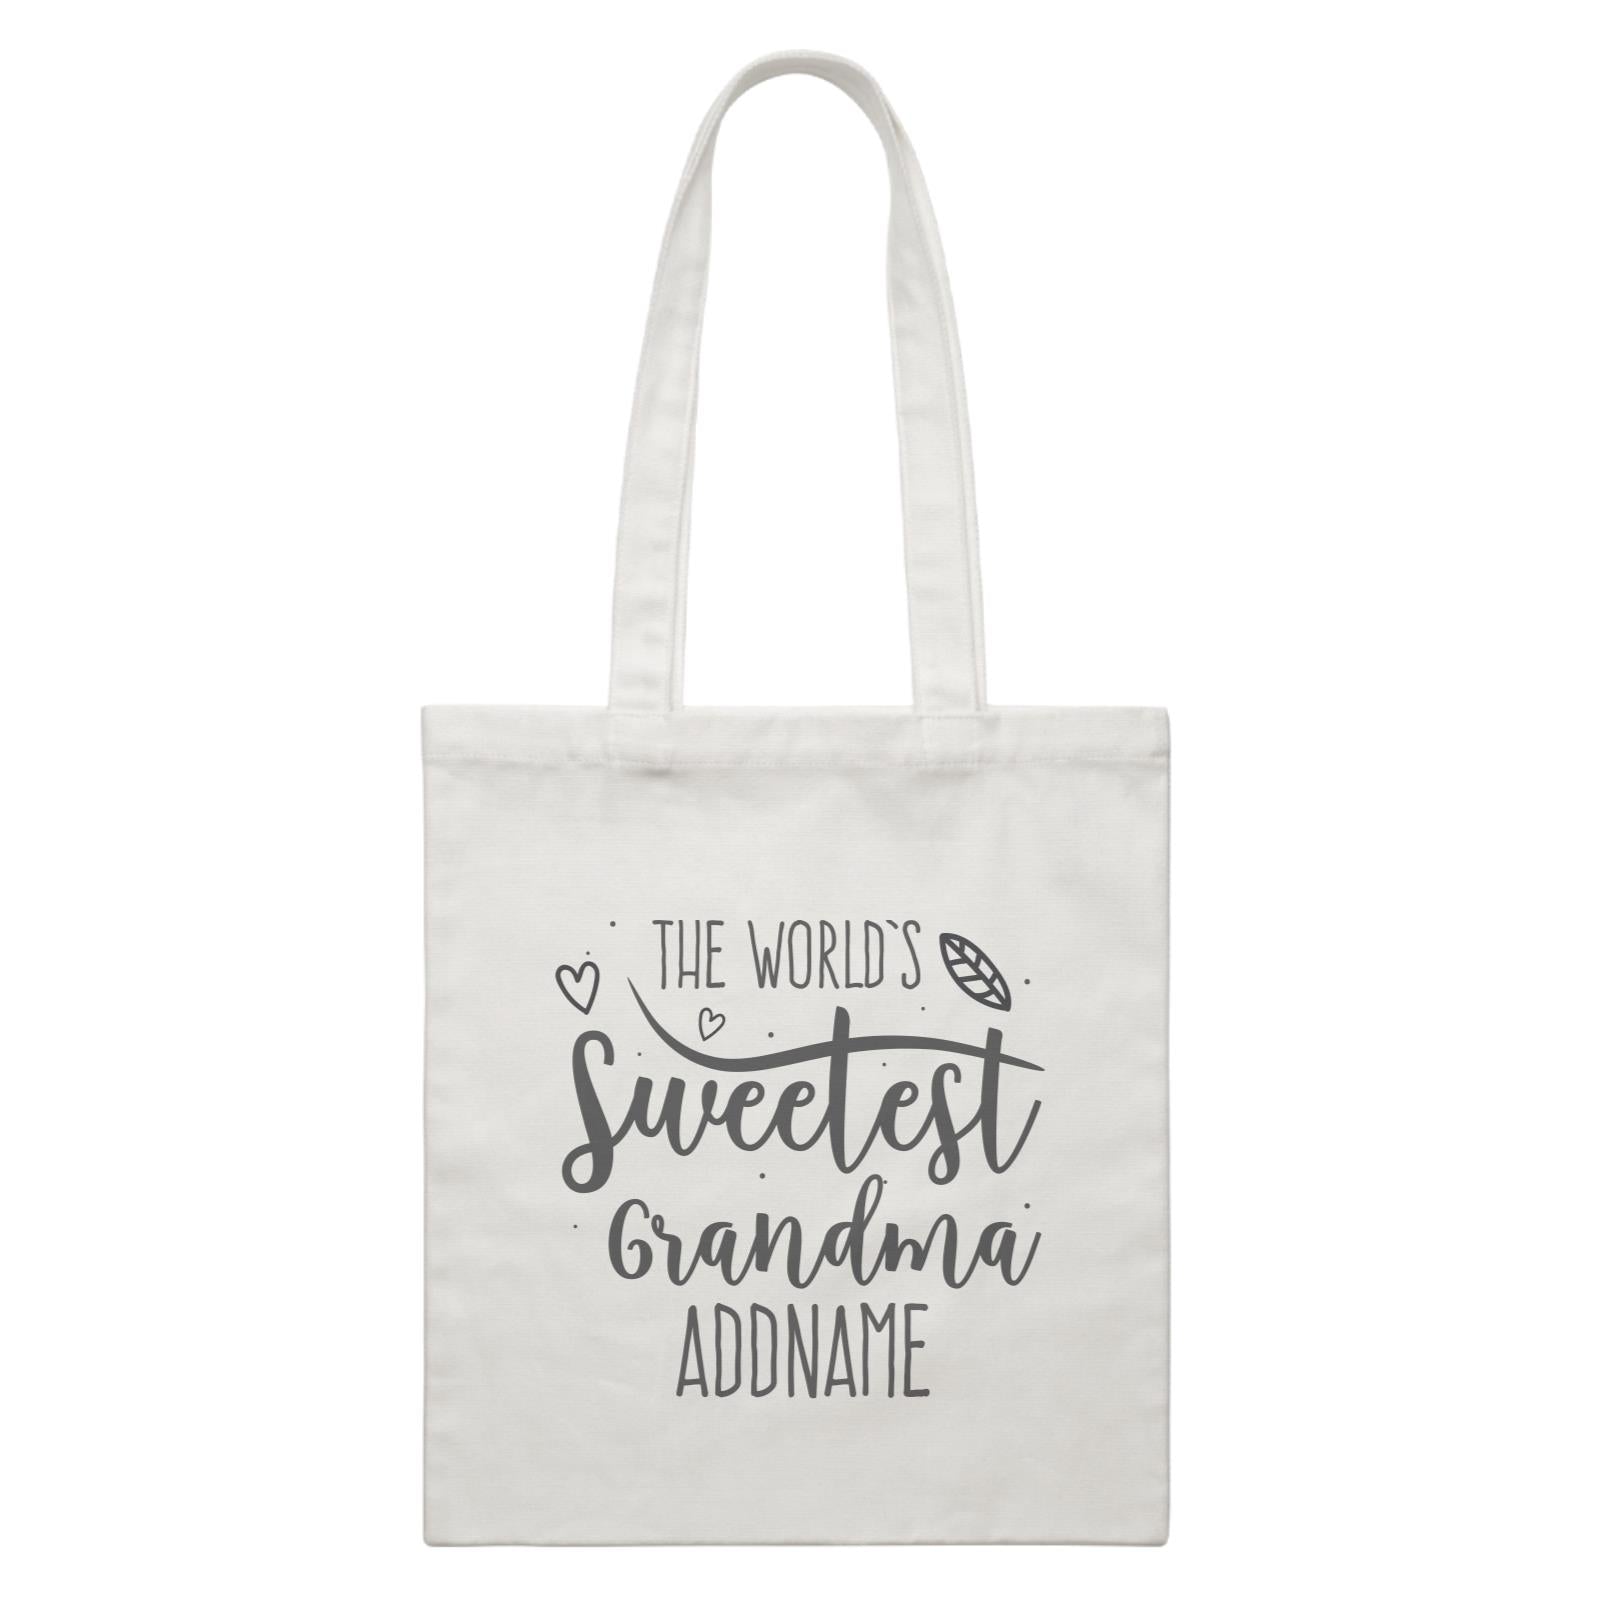 Sweet Mom Quotes 3 The Worlds Sweetest Grandma Addname White Canvas Bag